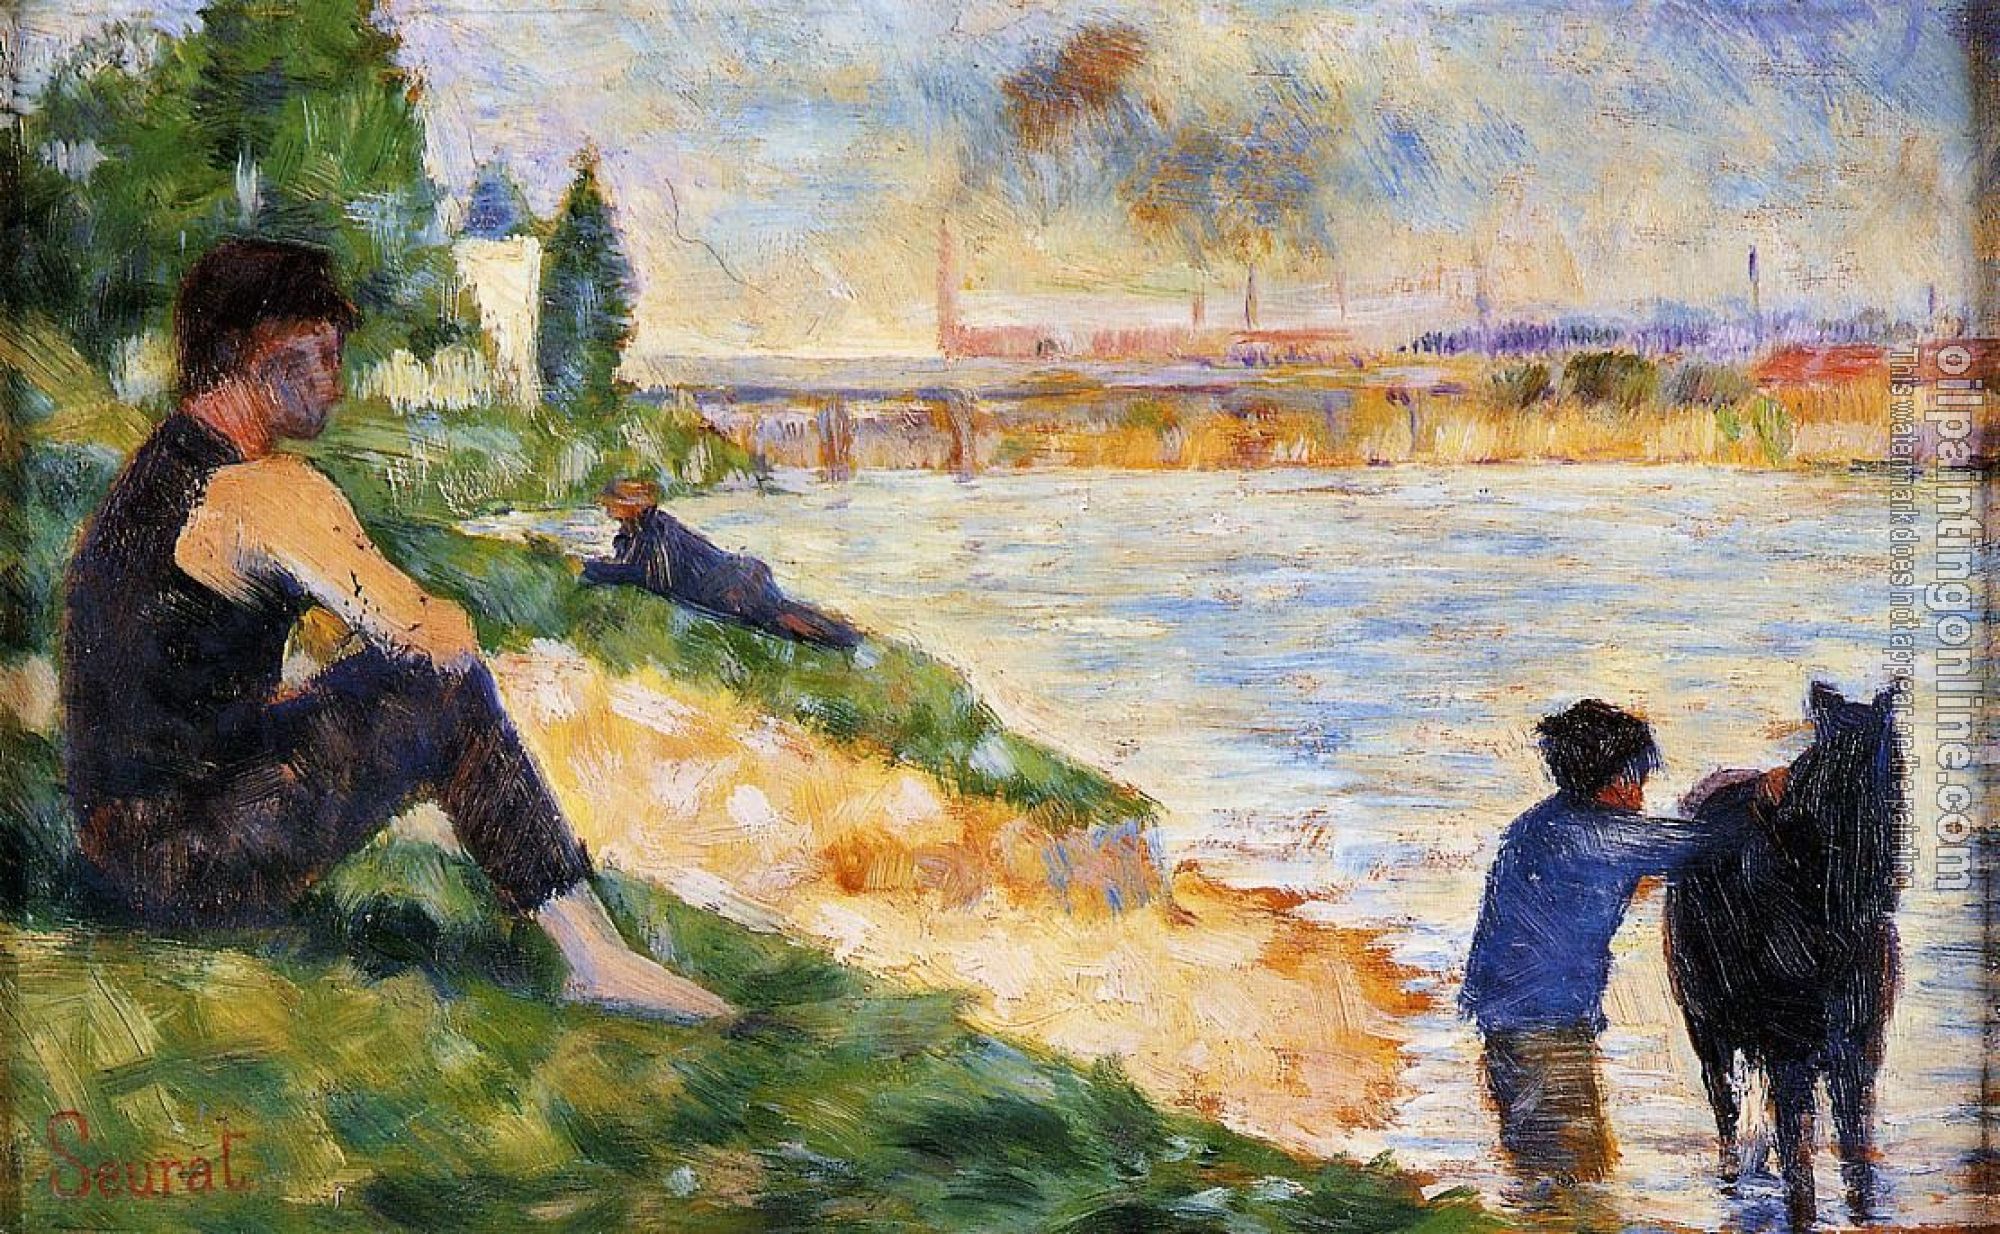 Seurat, Georges - Bathing at Asnieres, The Black Horse